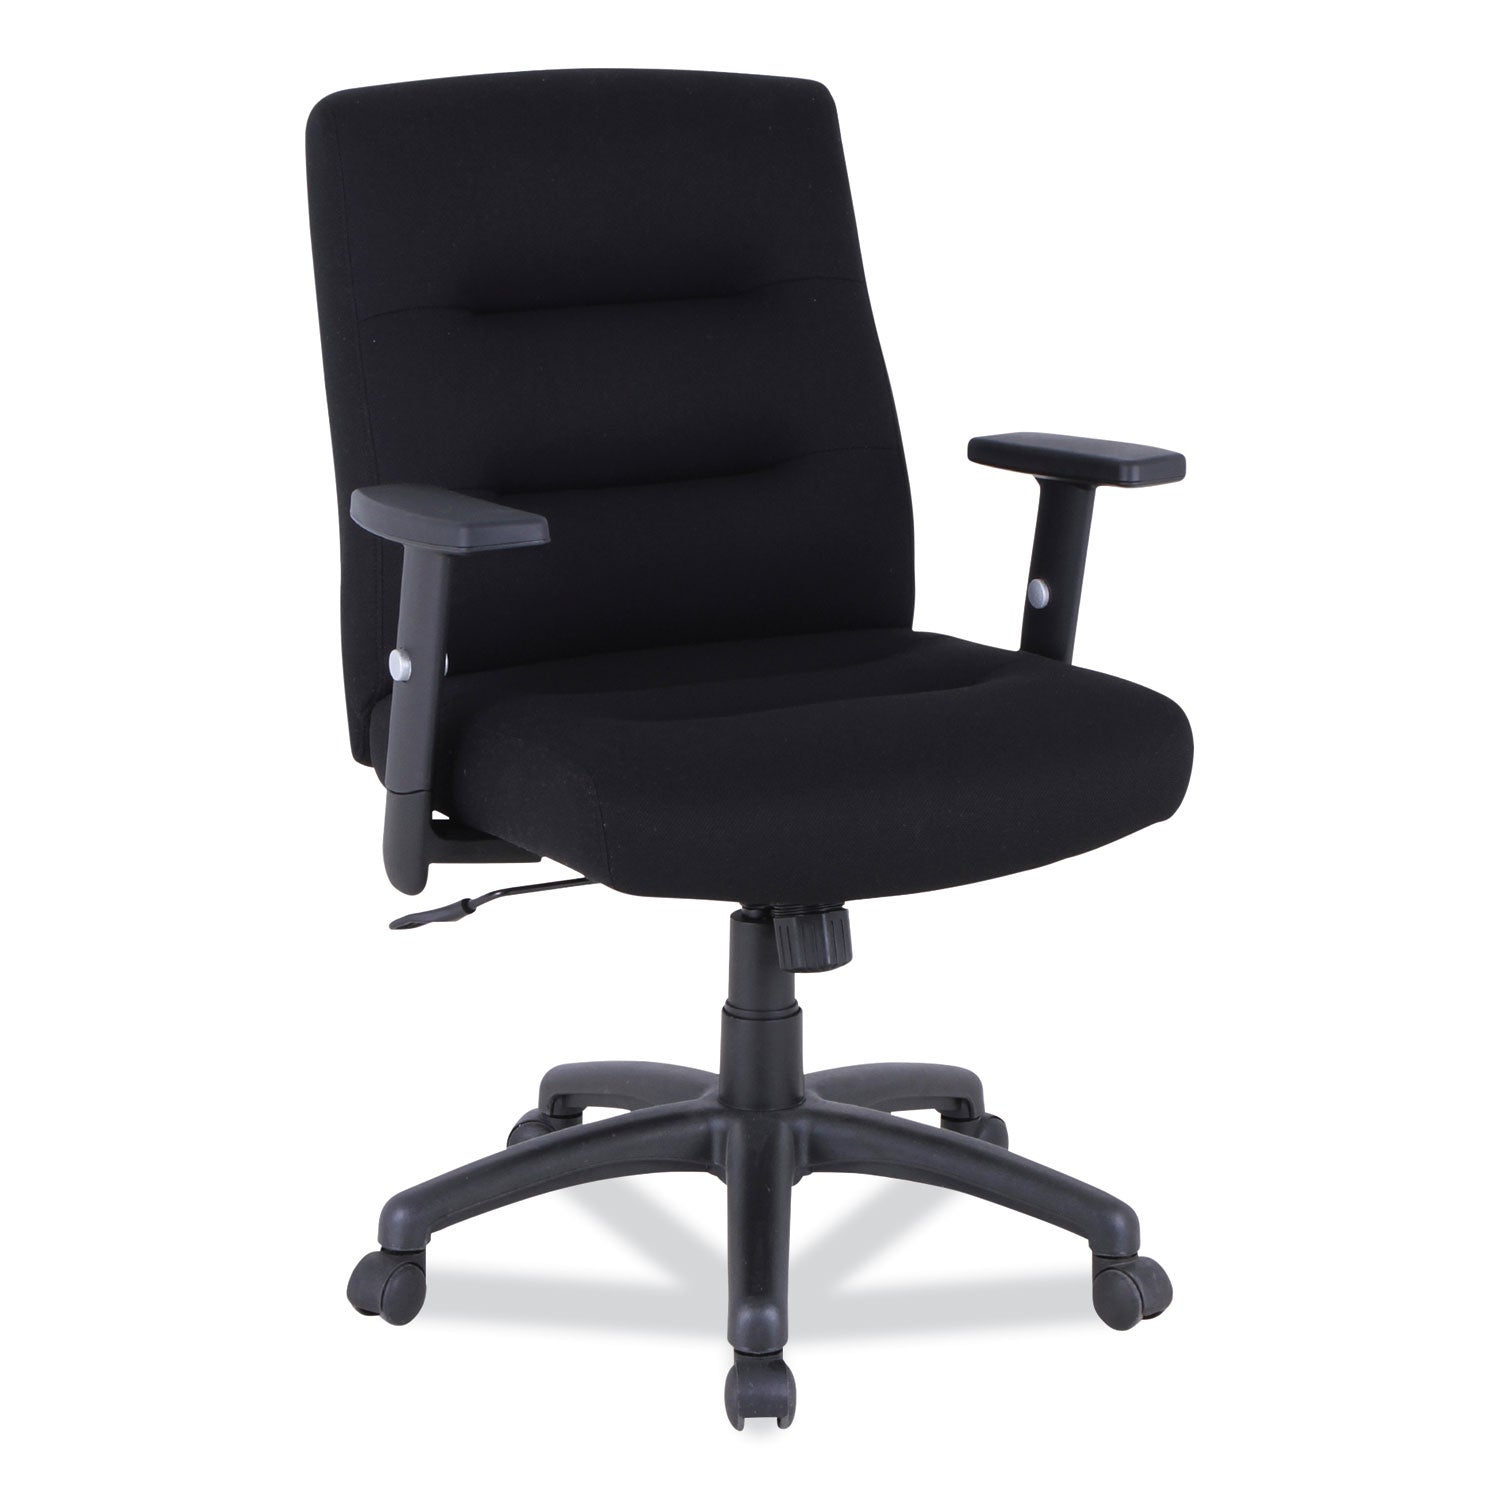 alera-kesson-series-petite-office-chair-supports-up-to-300-lb-1771-to-2165-seat-height-black_aleks4010 - 1